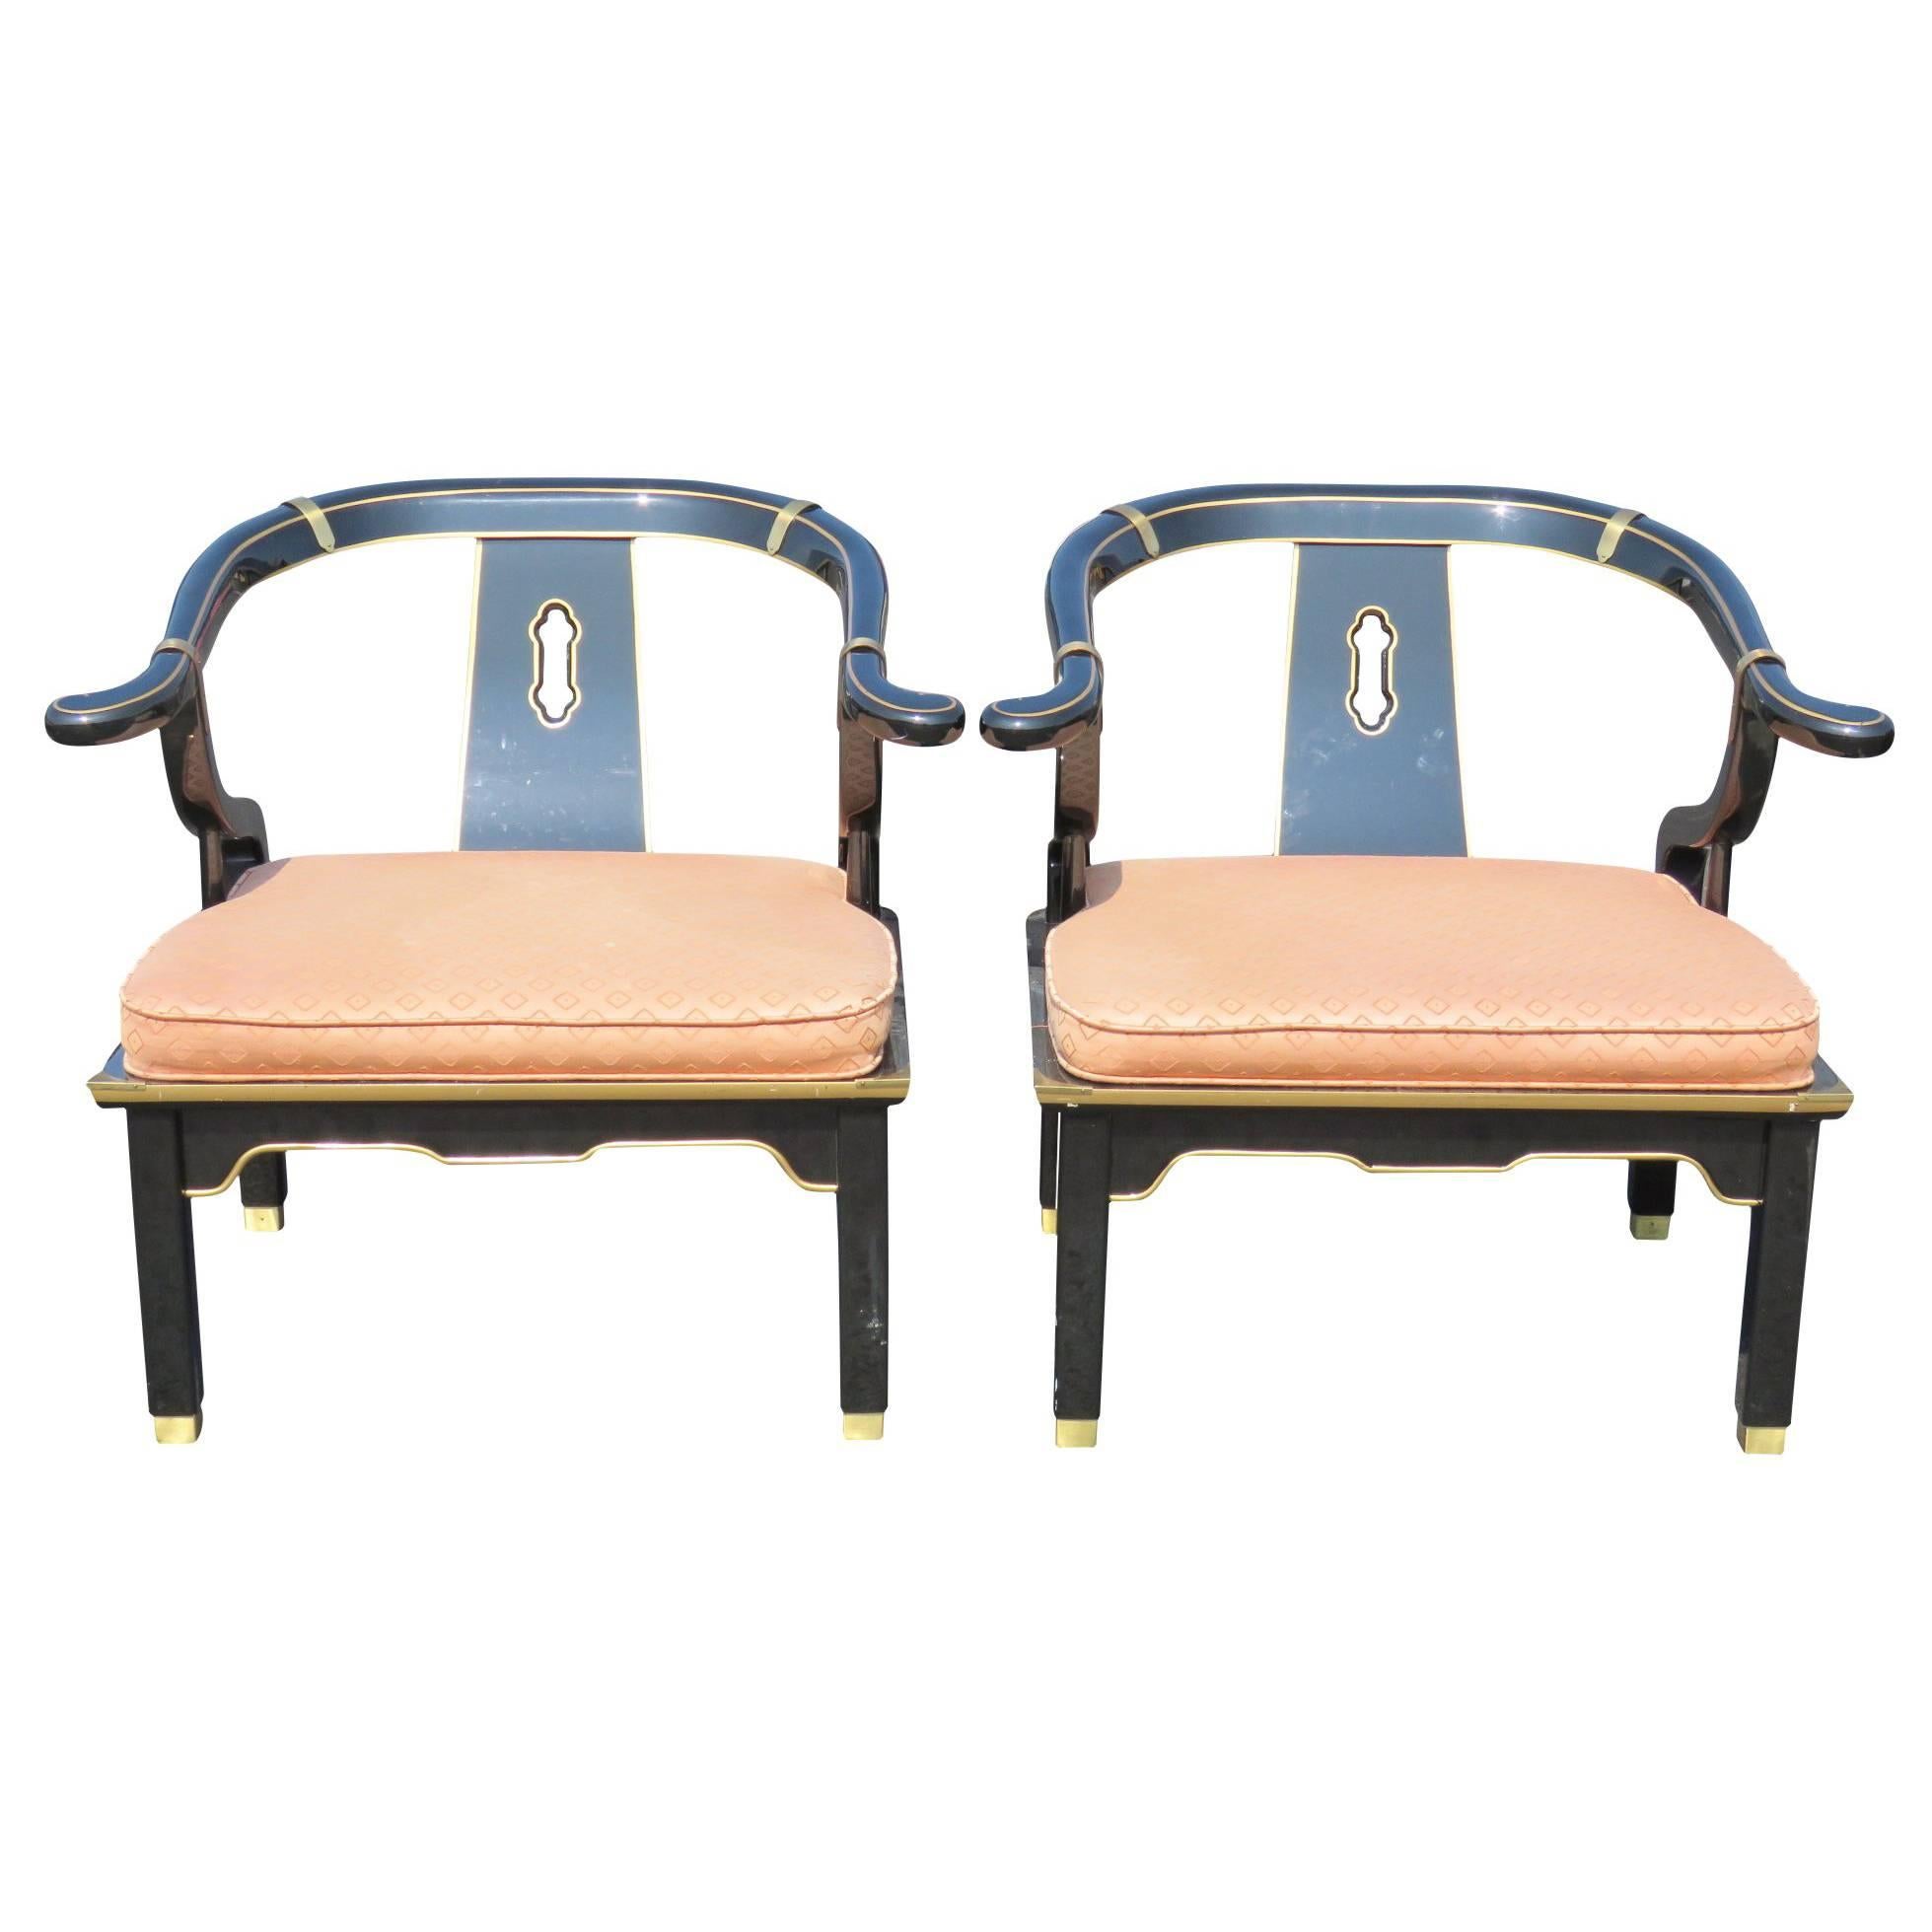 Pair of Asian Style Ebonized Arm Chairs In the style of James Mont